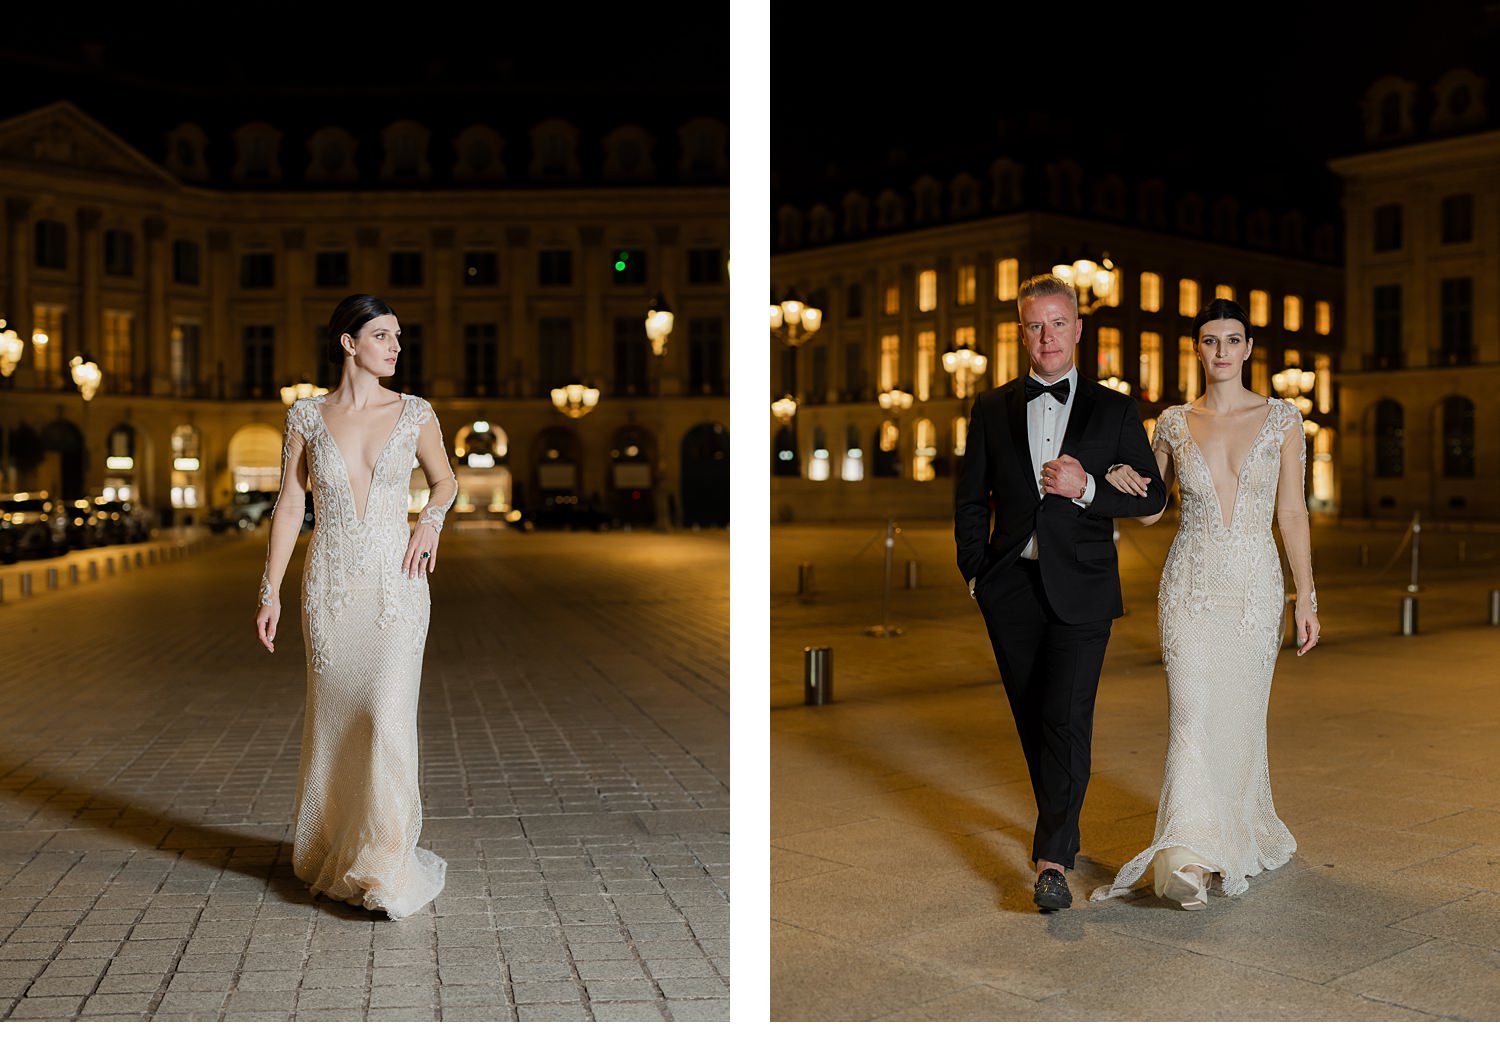 Nighttime bride and groom portraits outside the Ritz Paris, Elopement at the Ritz in Paris, Paris by night, Night time elopement in Paris